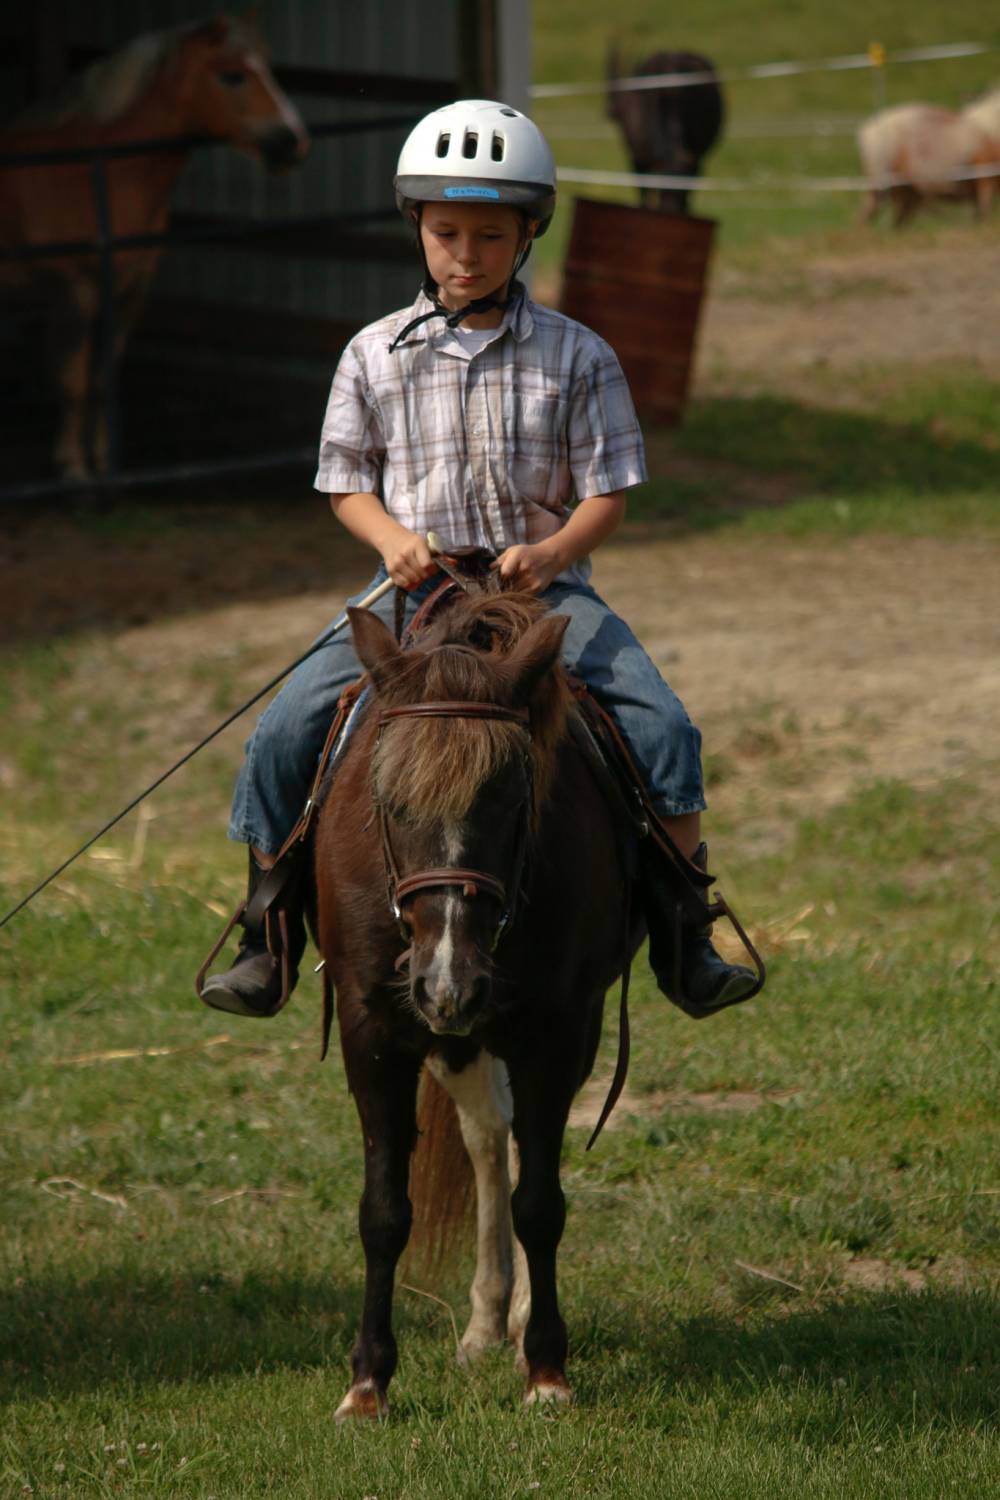 TOP PENNSYLVANIA OVERNIGHT CAMP: Fairview Farm and Guest Ranch - Rough Riders Girl s Camp is a Top Overnight Summer Camp located in Granville Summit Pennsylvania offering many fun and enriching Overnight and other camp programs. 